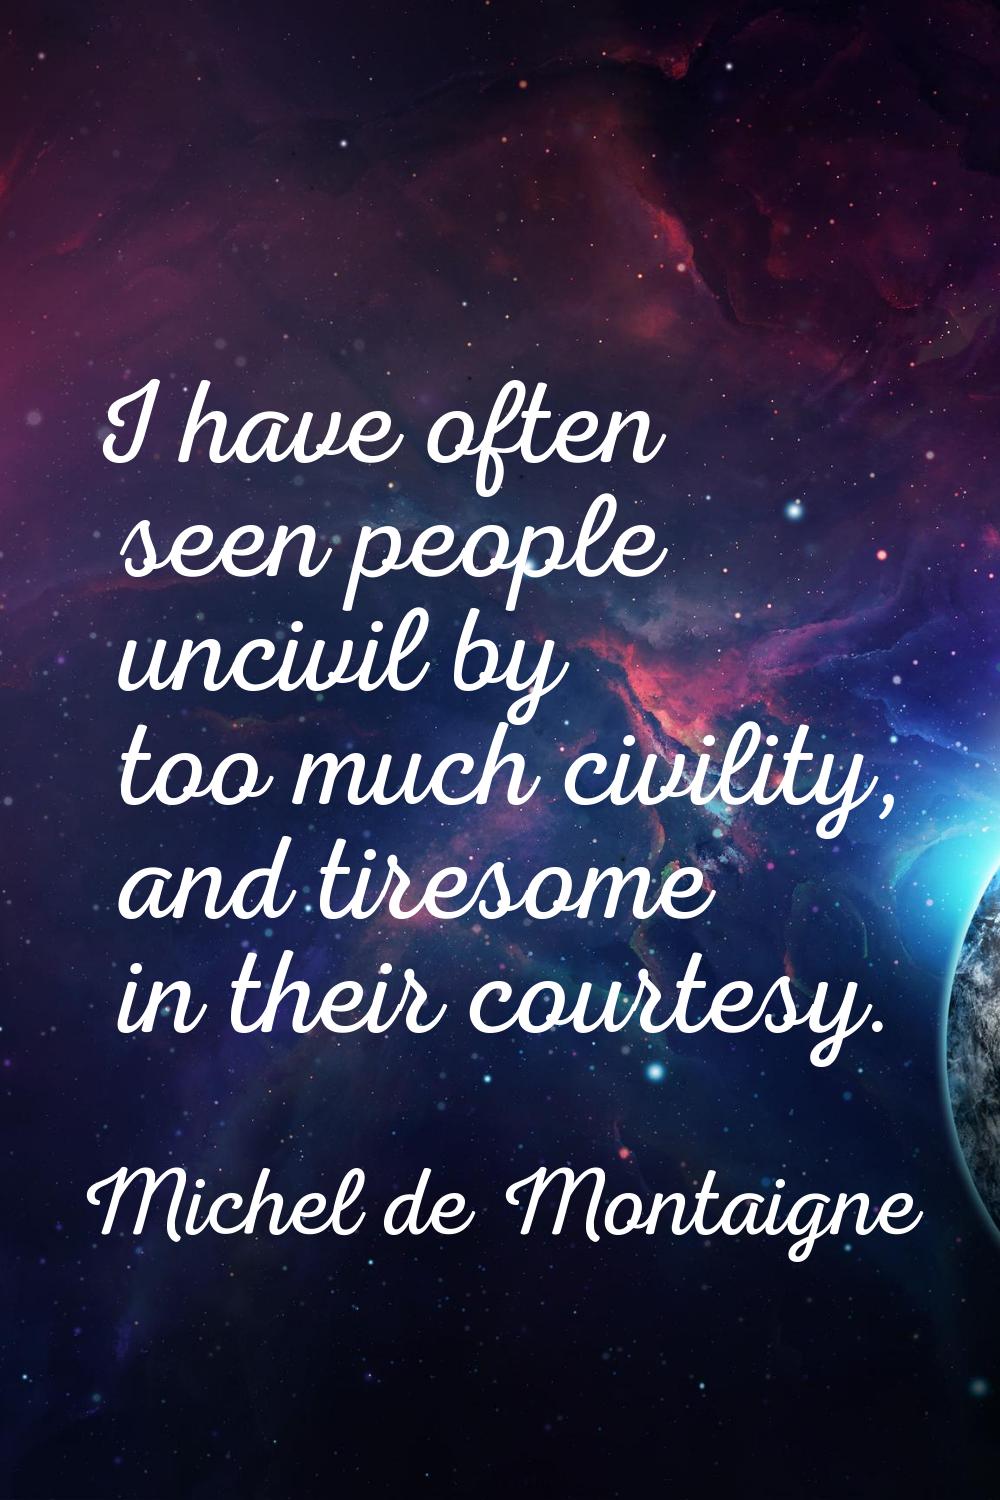 I have often seen people uncivil by too much civility, and tiresome in their courtesy.